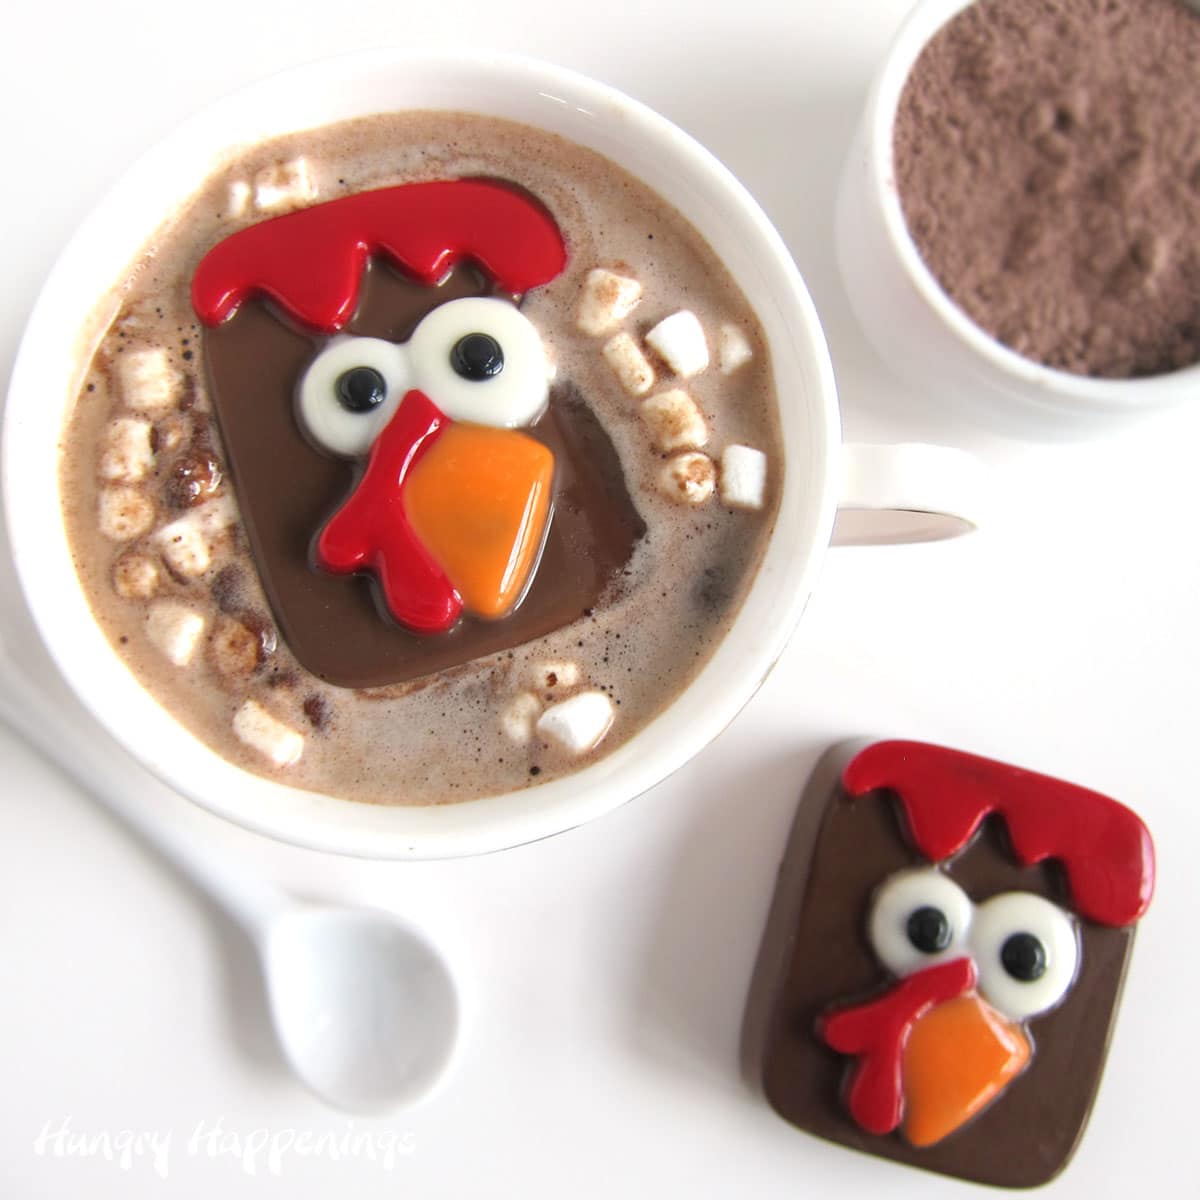 Turkey hot chocolate bomb in a mug of hot milk with marshmallows set next to a bowl of hot cocoa mix and a hot chocolate bomb turkey.